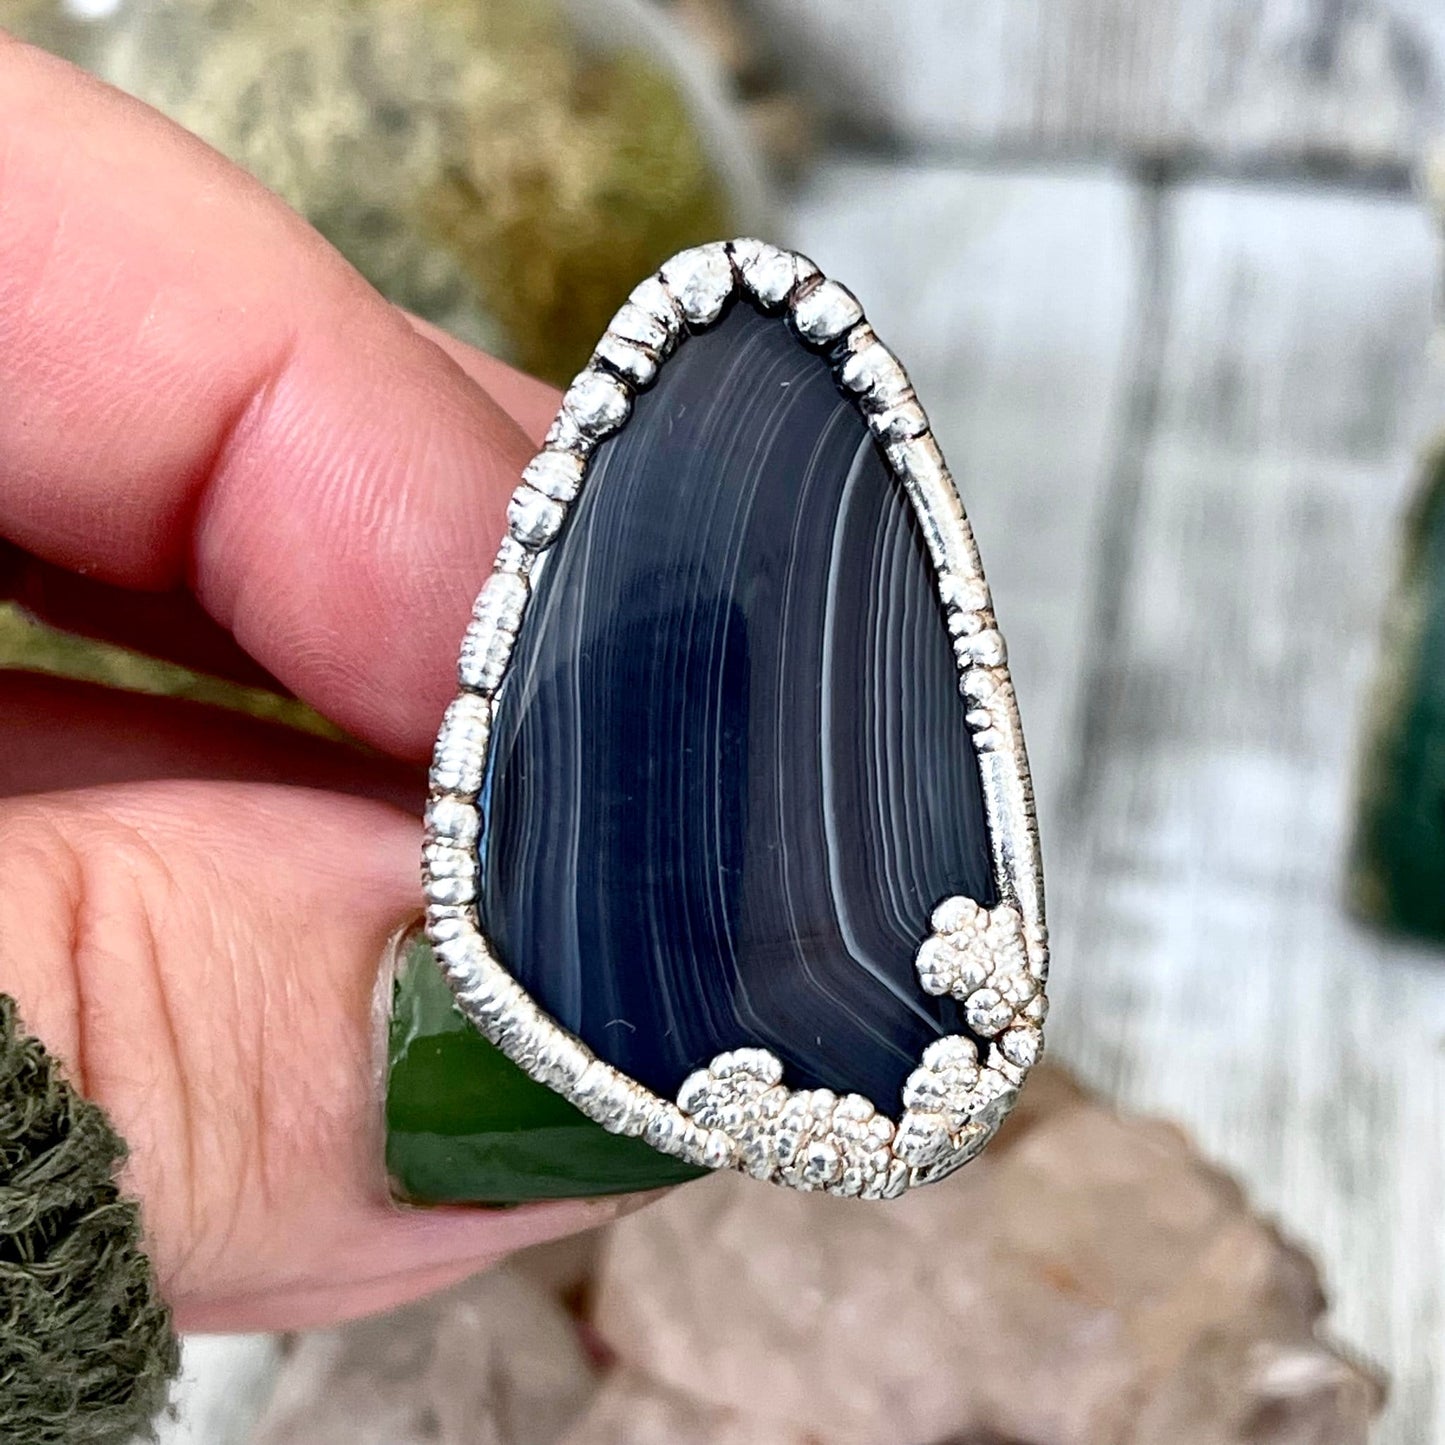 Size 6 Botswana Agate Statement Ring Set in Fine Silver / Foxlark Collection - One of a Kind